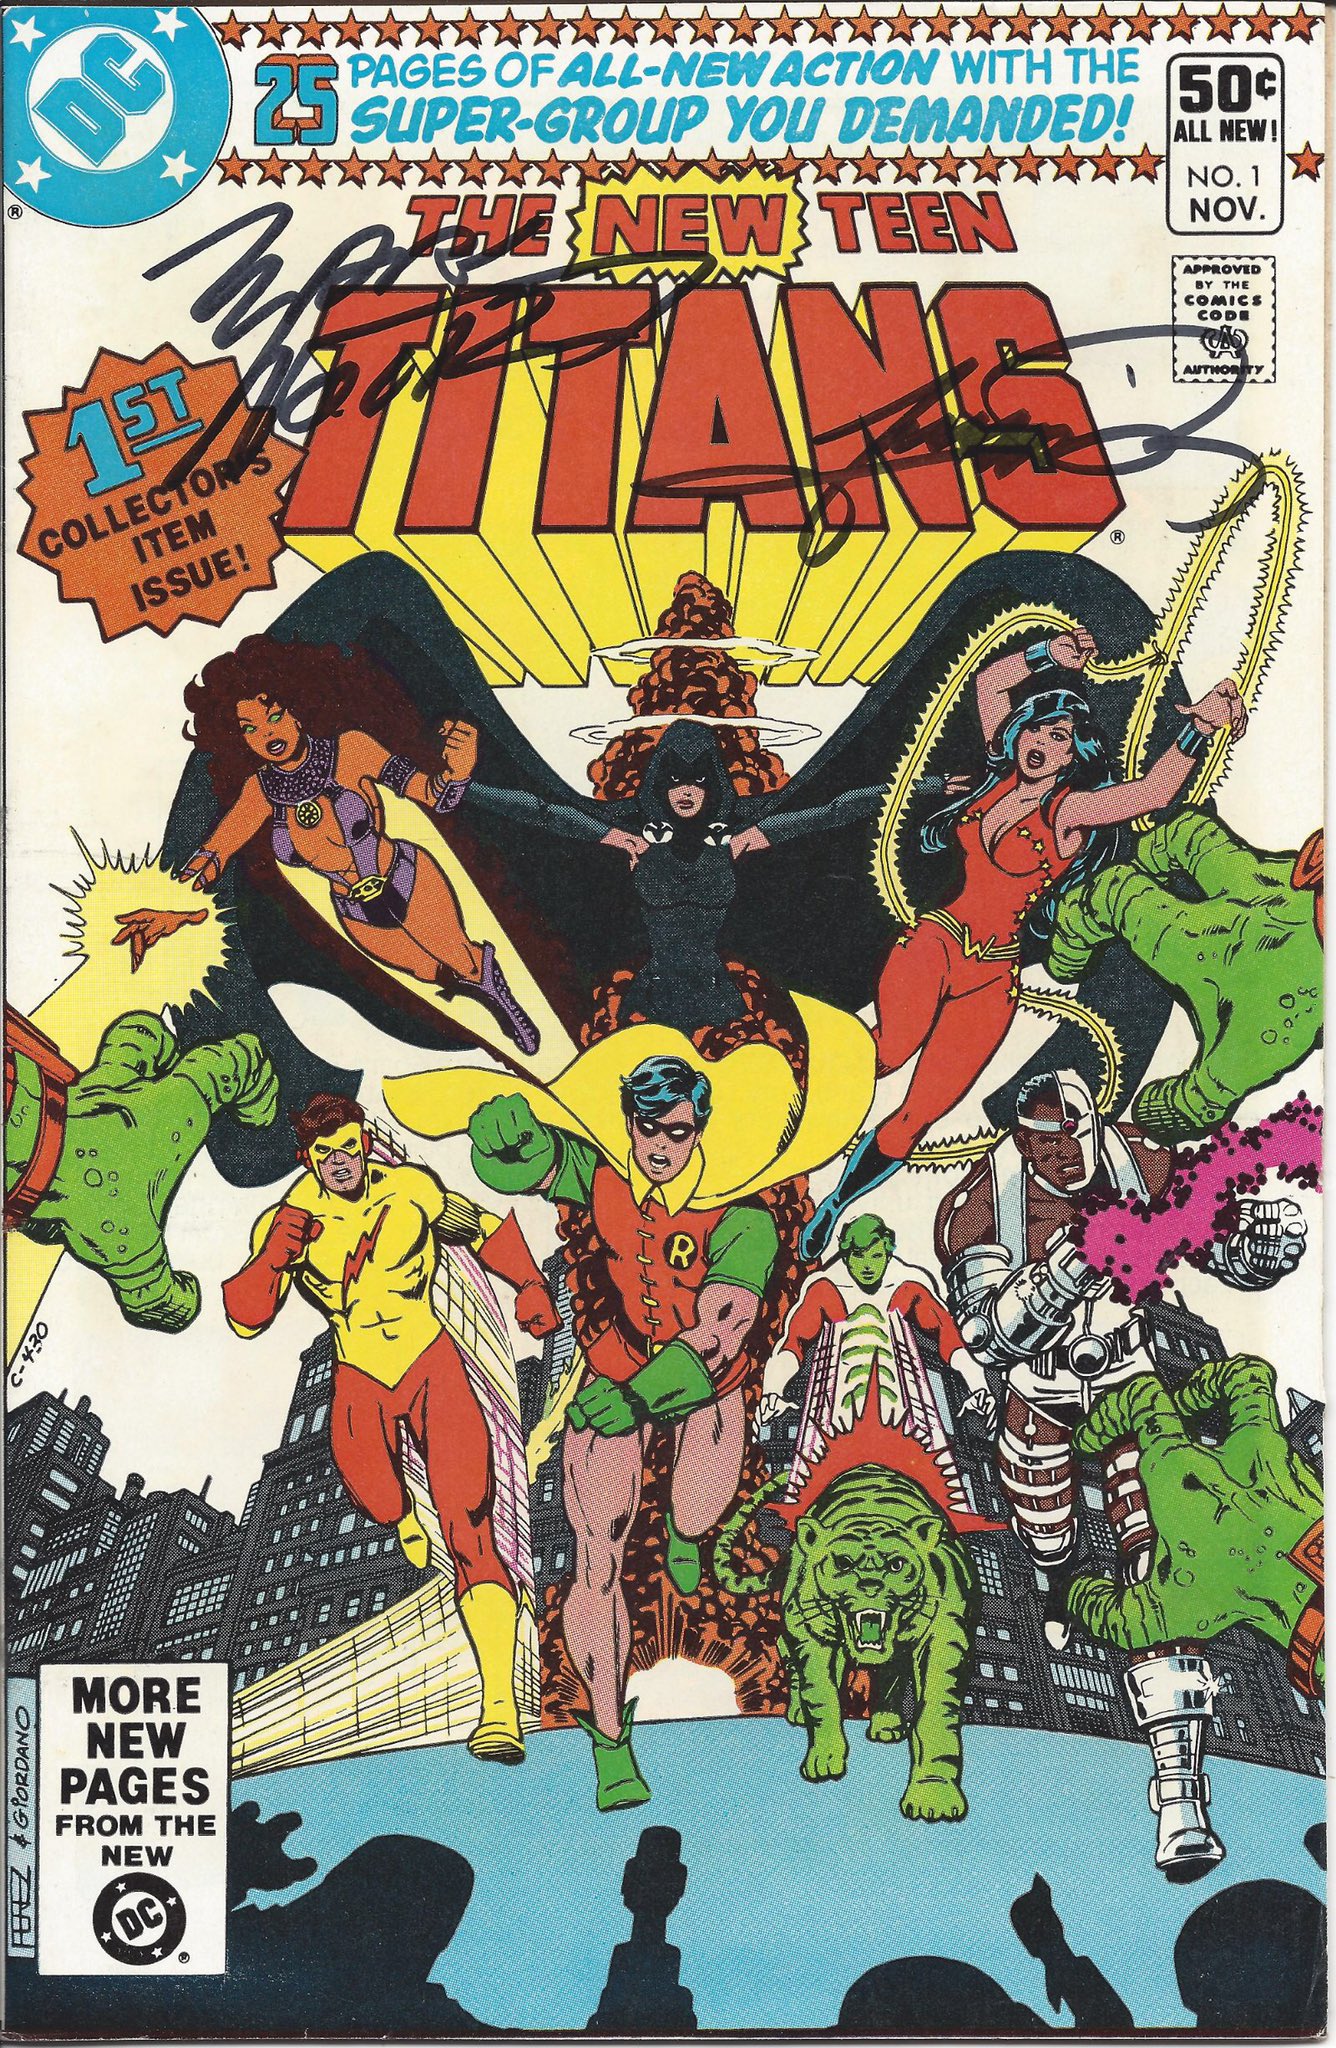 Happy birthday to one of the masters of the art form, George Perez   